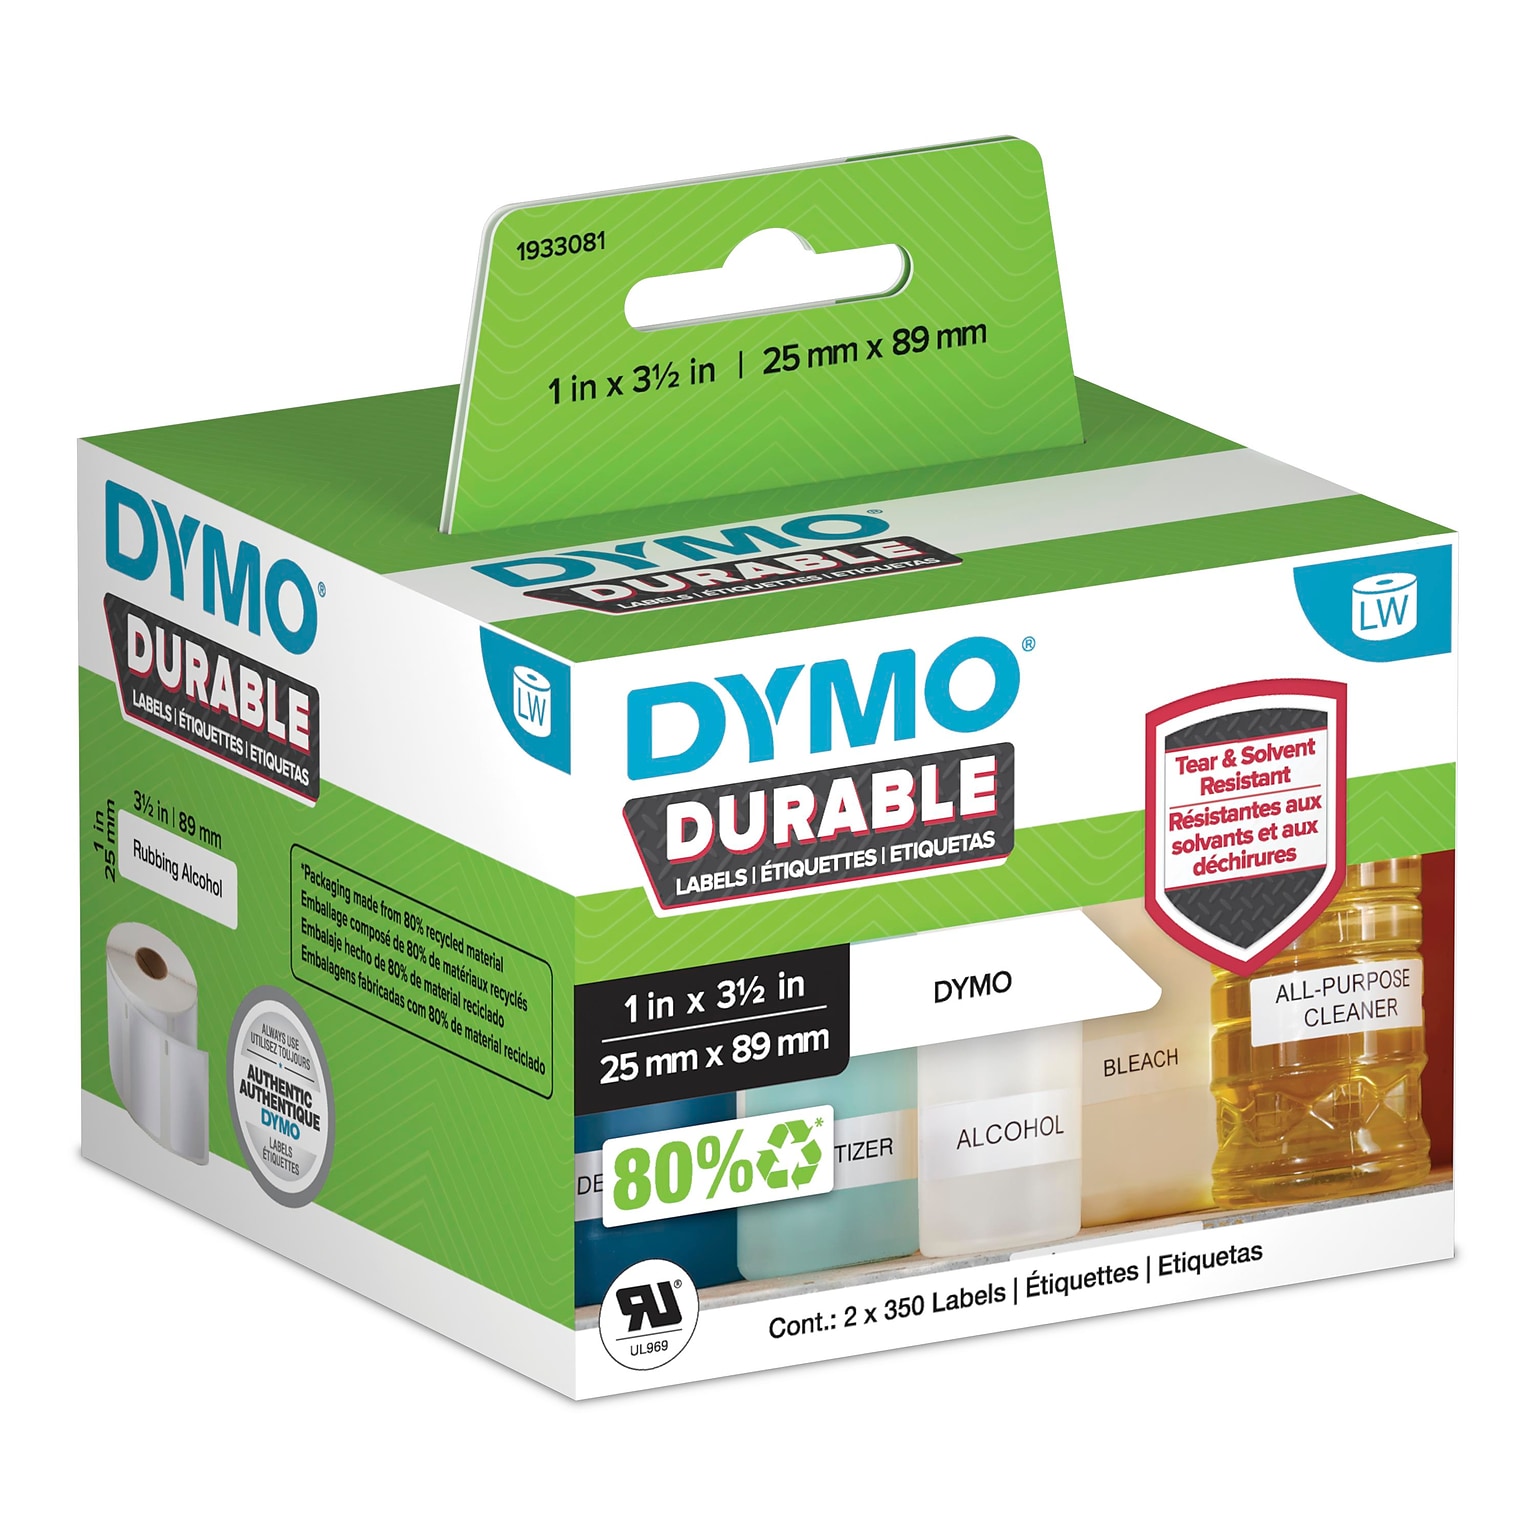 DYMO LabelWriter 1933081 Durable Industrial Labels, 3-1/2 x 1, Black on White, 350 Labels/Roll, 2 Rolls/Box (1933081)